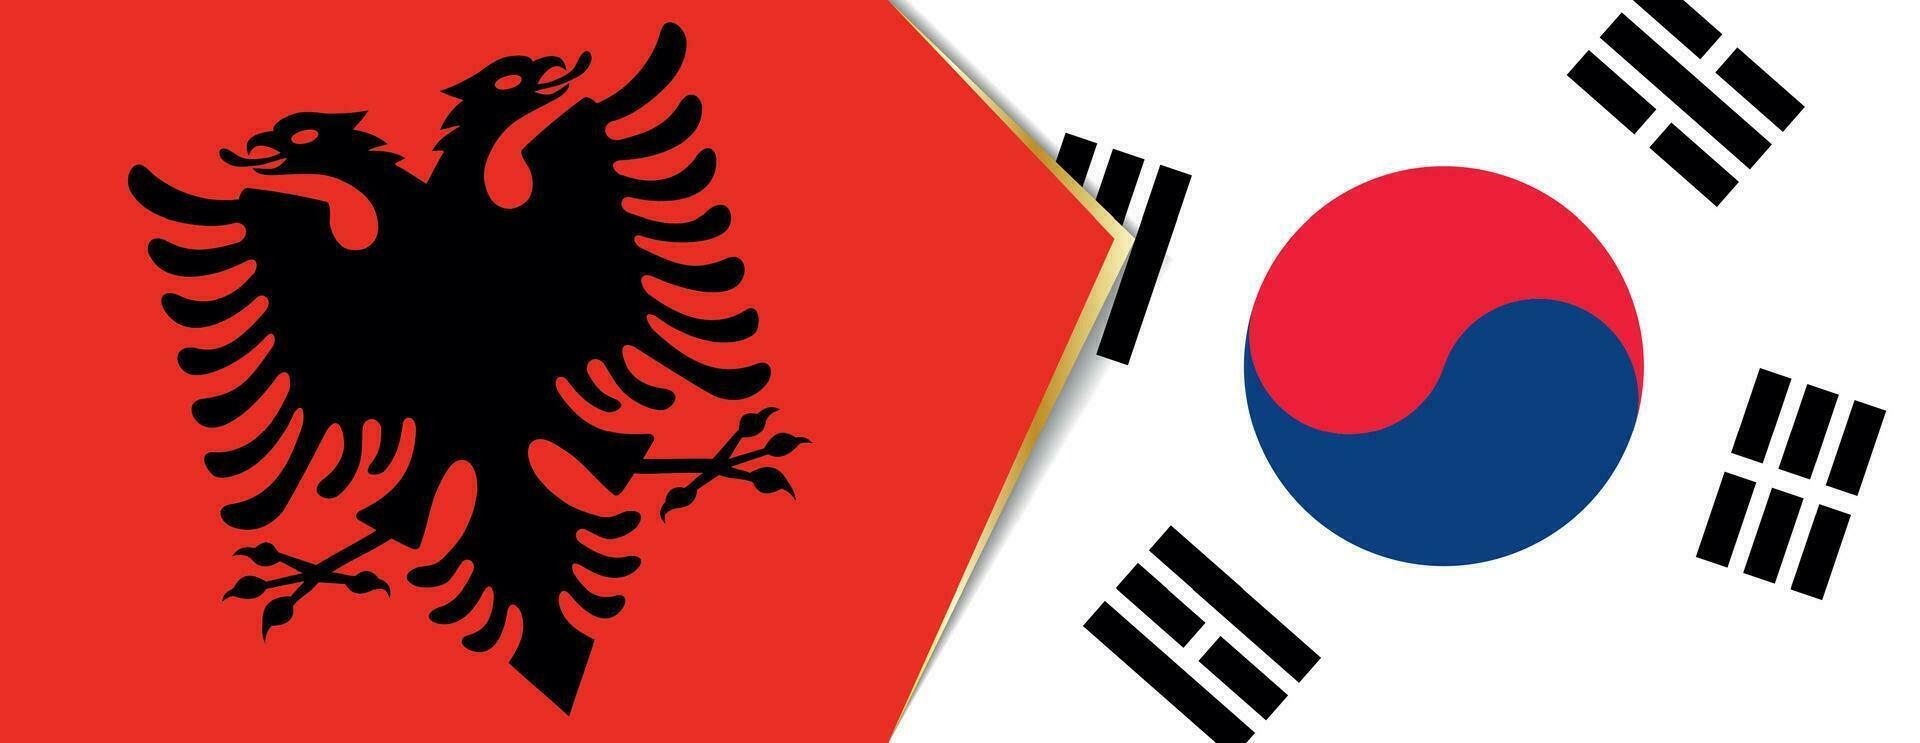 Albania and South Korea flags, two vector flags.